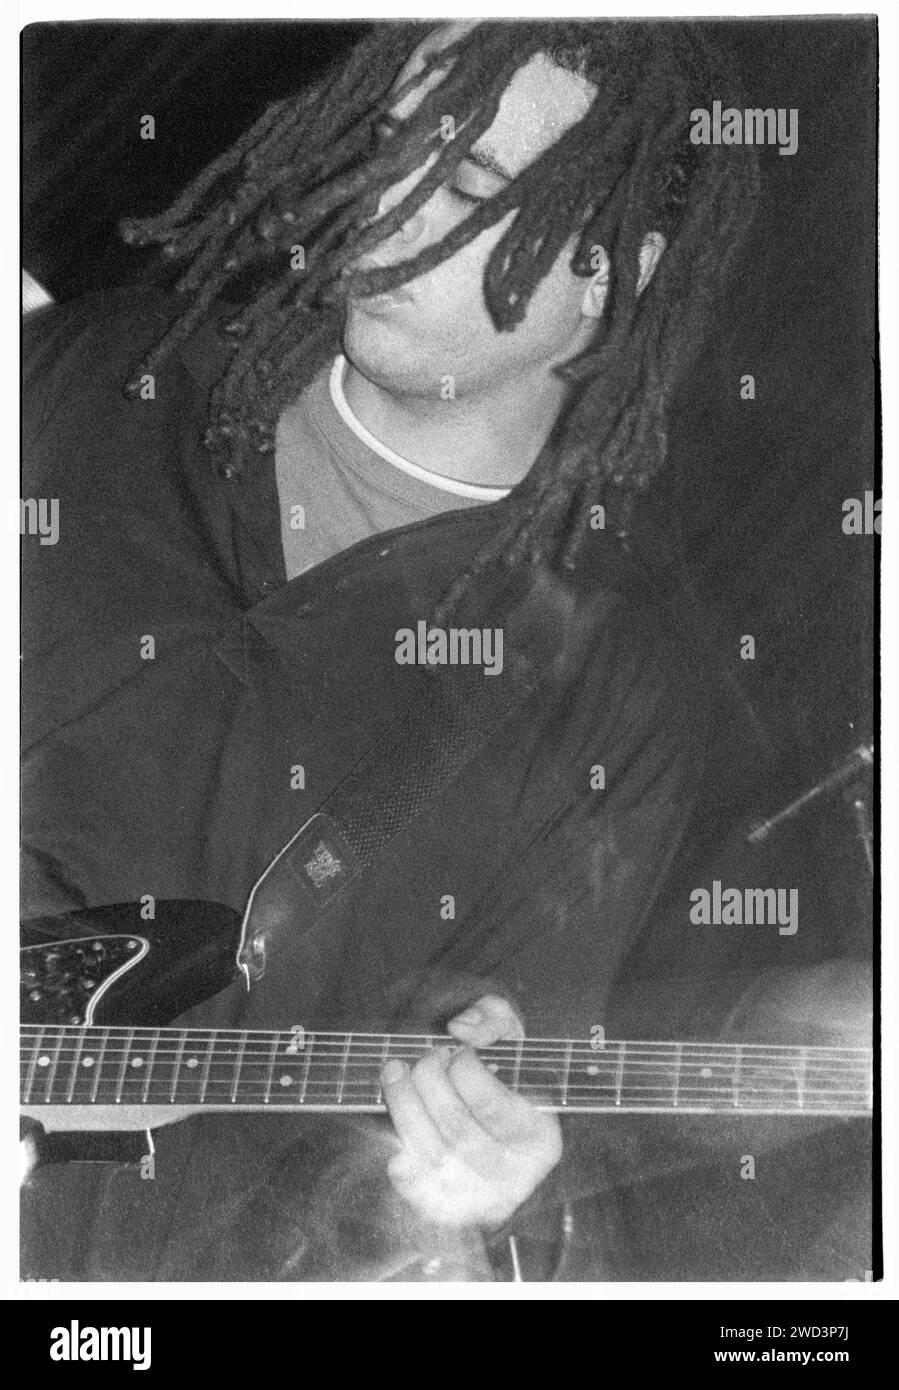 Adam Franklin of Swervedriver playing live at Bristol University Anson Rooms, Bristol, England on 27 October 1993. Photo: Rob Watkins. INFO: Swervedriver, a British alternative rock band formed in 1989, is known for their shoegaze and dream-pop influences. Albums like 'Raise' and 'Mezcal Head' showcased their swirling guitar sound and dynamic songwriting, making them influential figures in the alternative music scene. Stock Photo